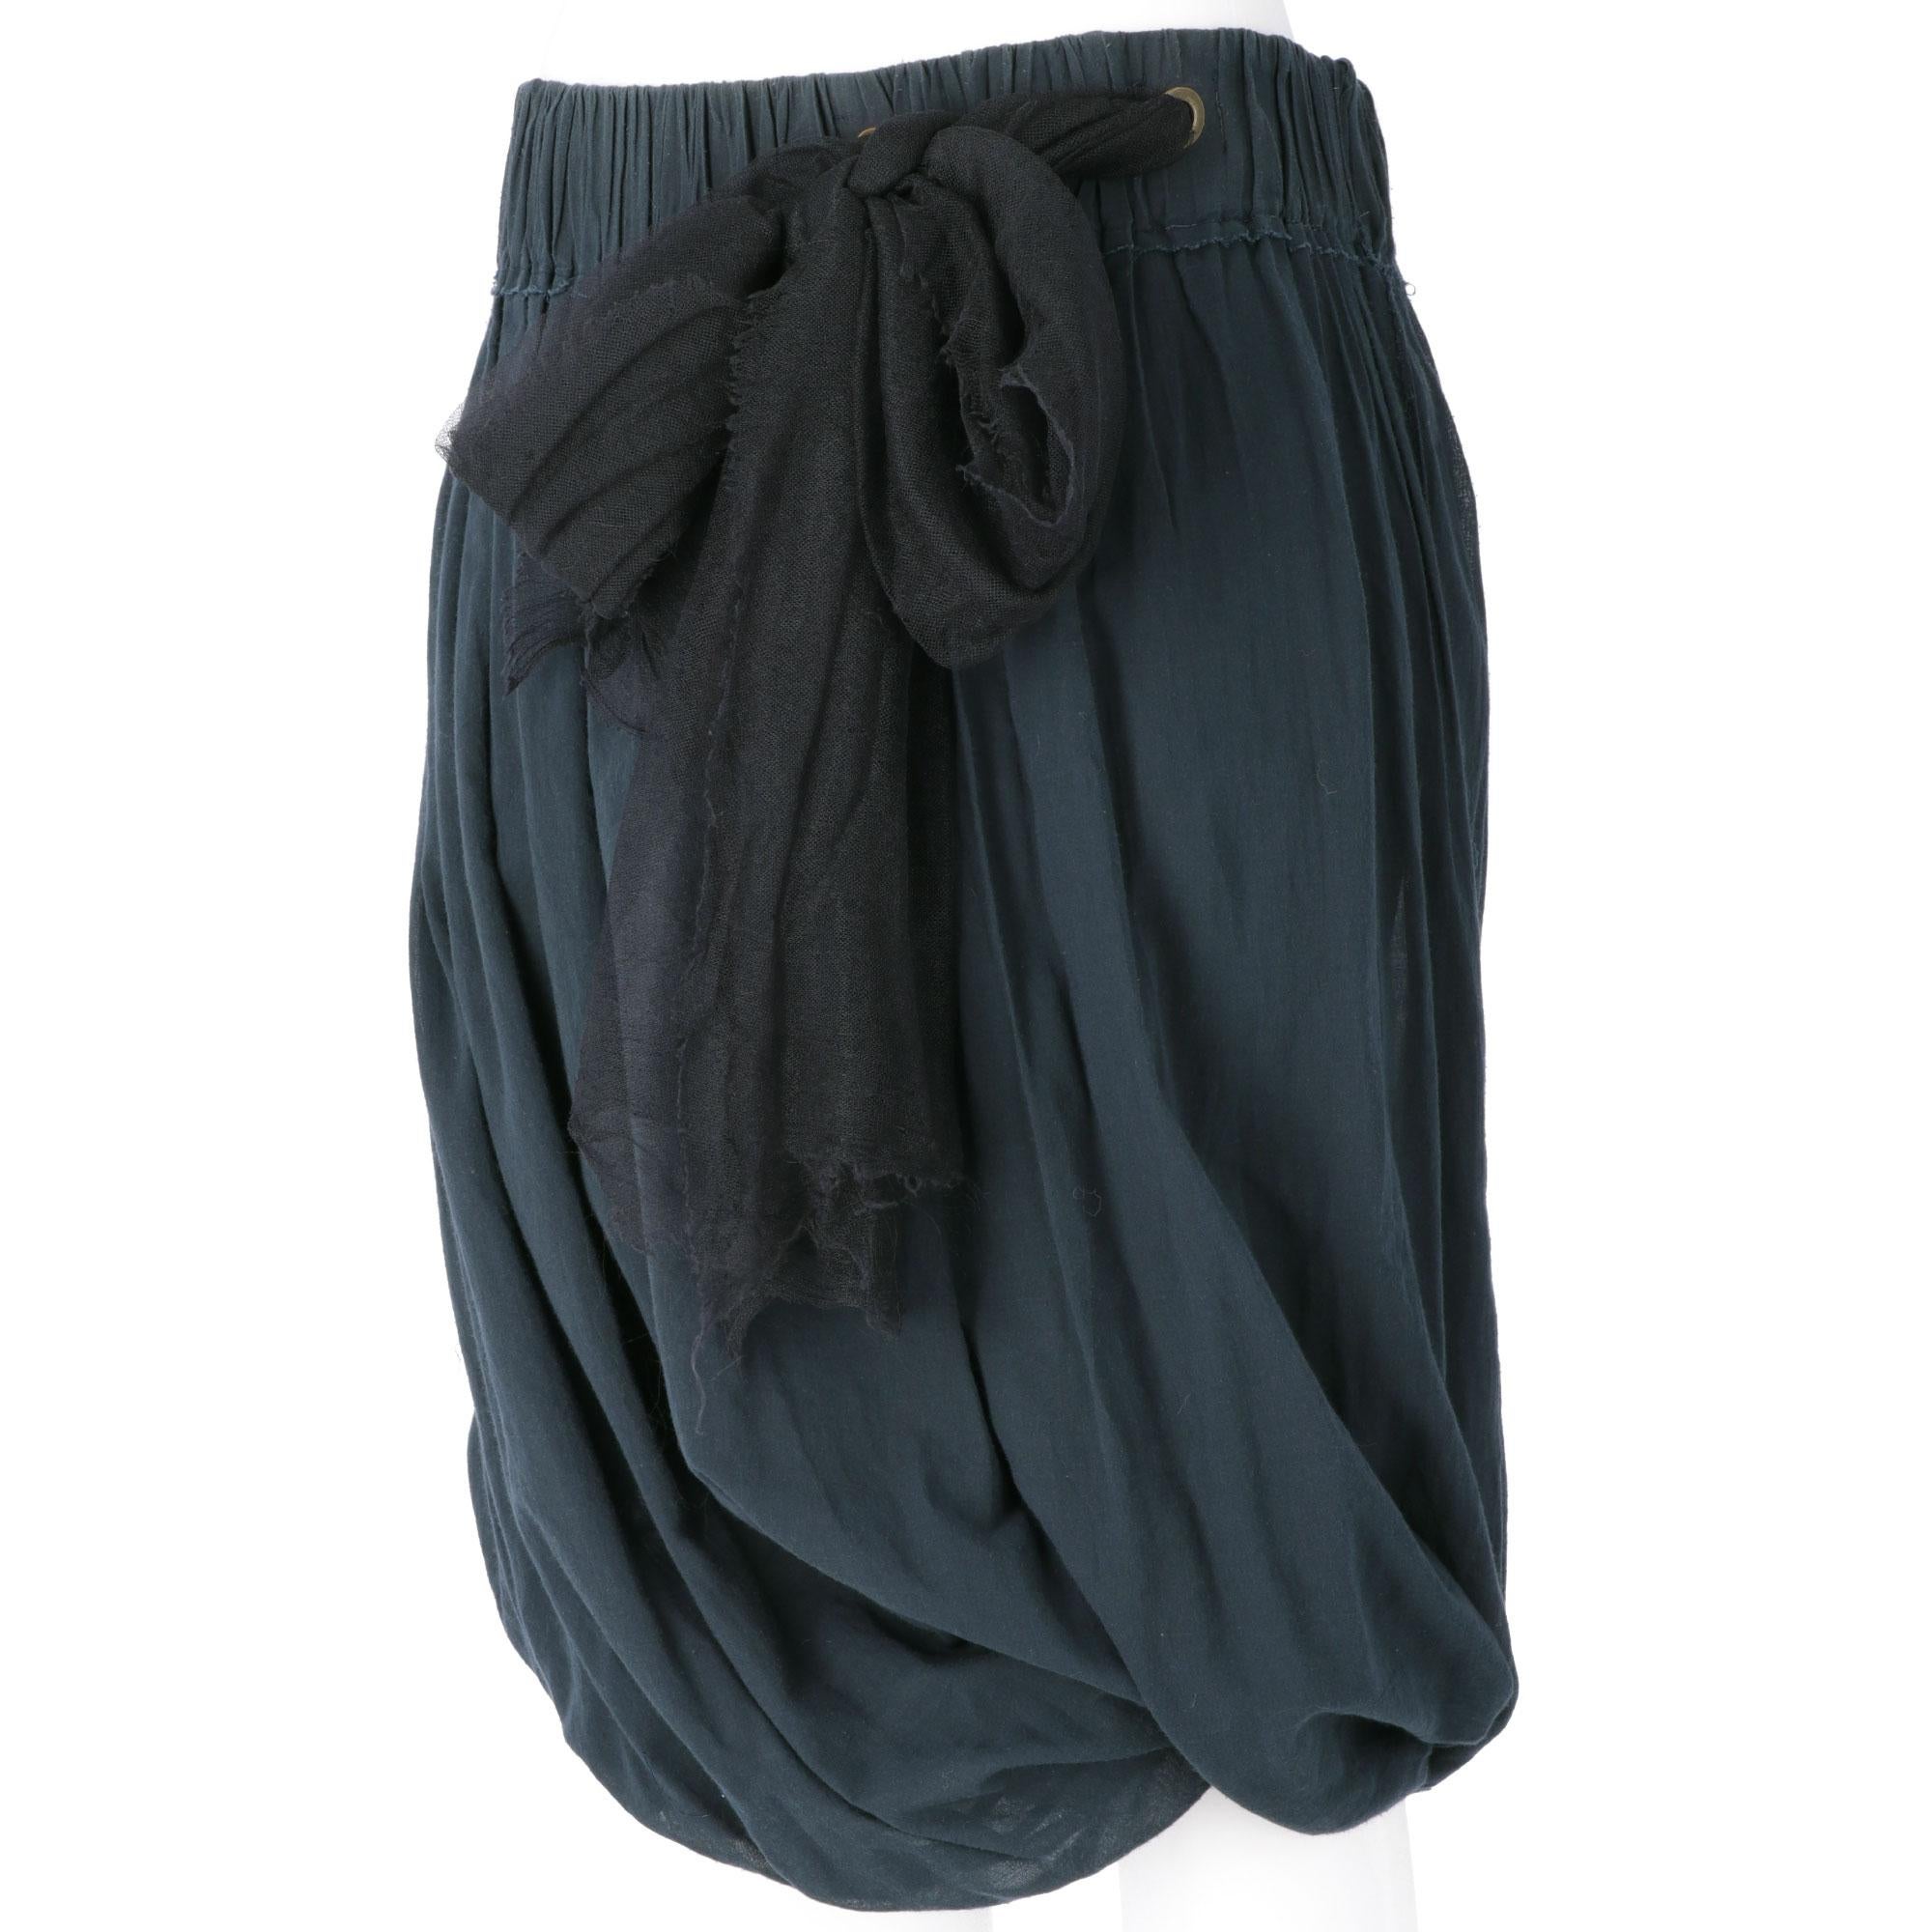 Lanvin blue petroleum cotton knee-length skirt, with a high-waisted, 
balloon shape with drapery, elastic waistband and large bow in black tulle. Lined.
Years: Sumer 2006

Made in France

Size: 38 FR

Linear measures

Height: 65 cm
Waist: 41 cm
